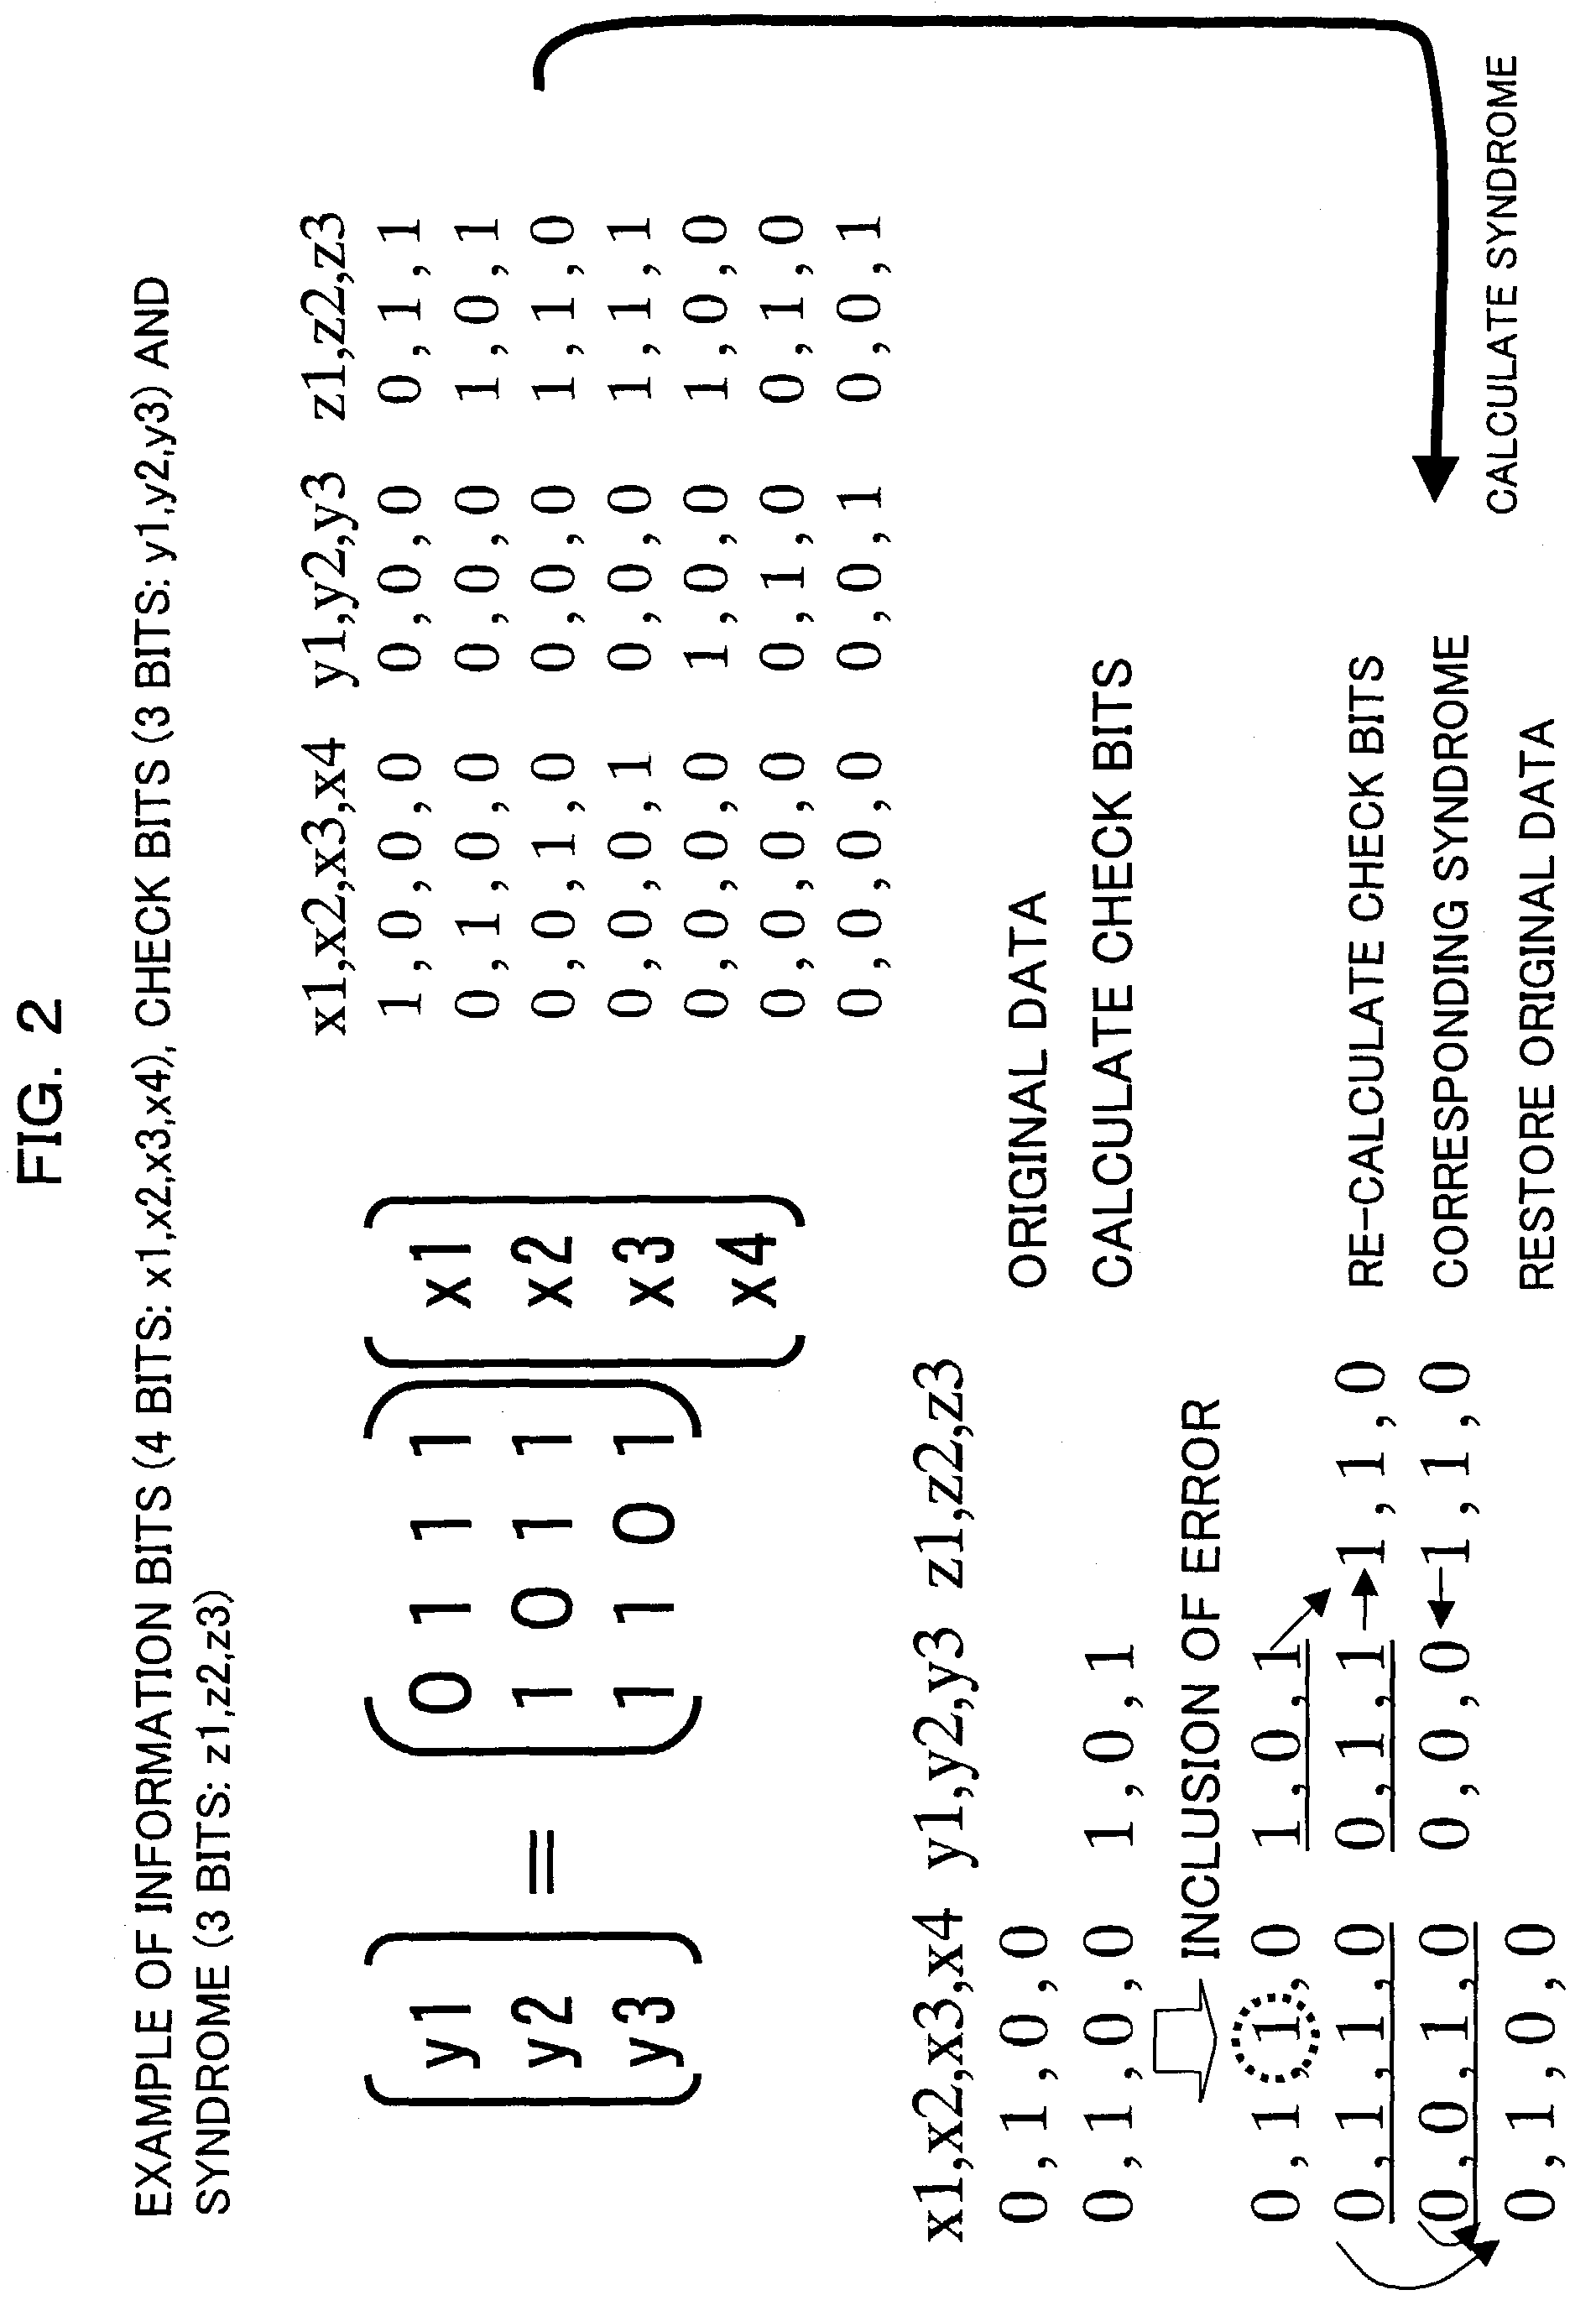 Apparatus and method for diagnosing integrated circuit